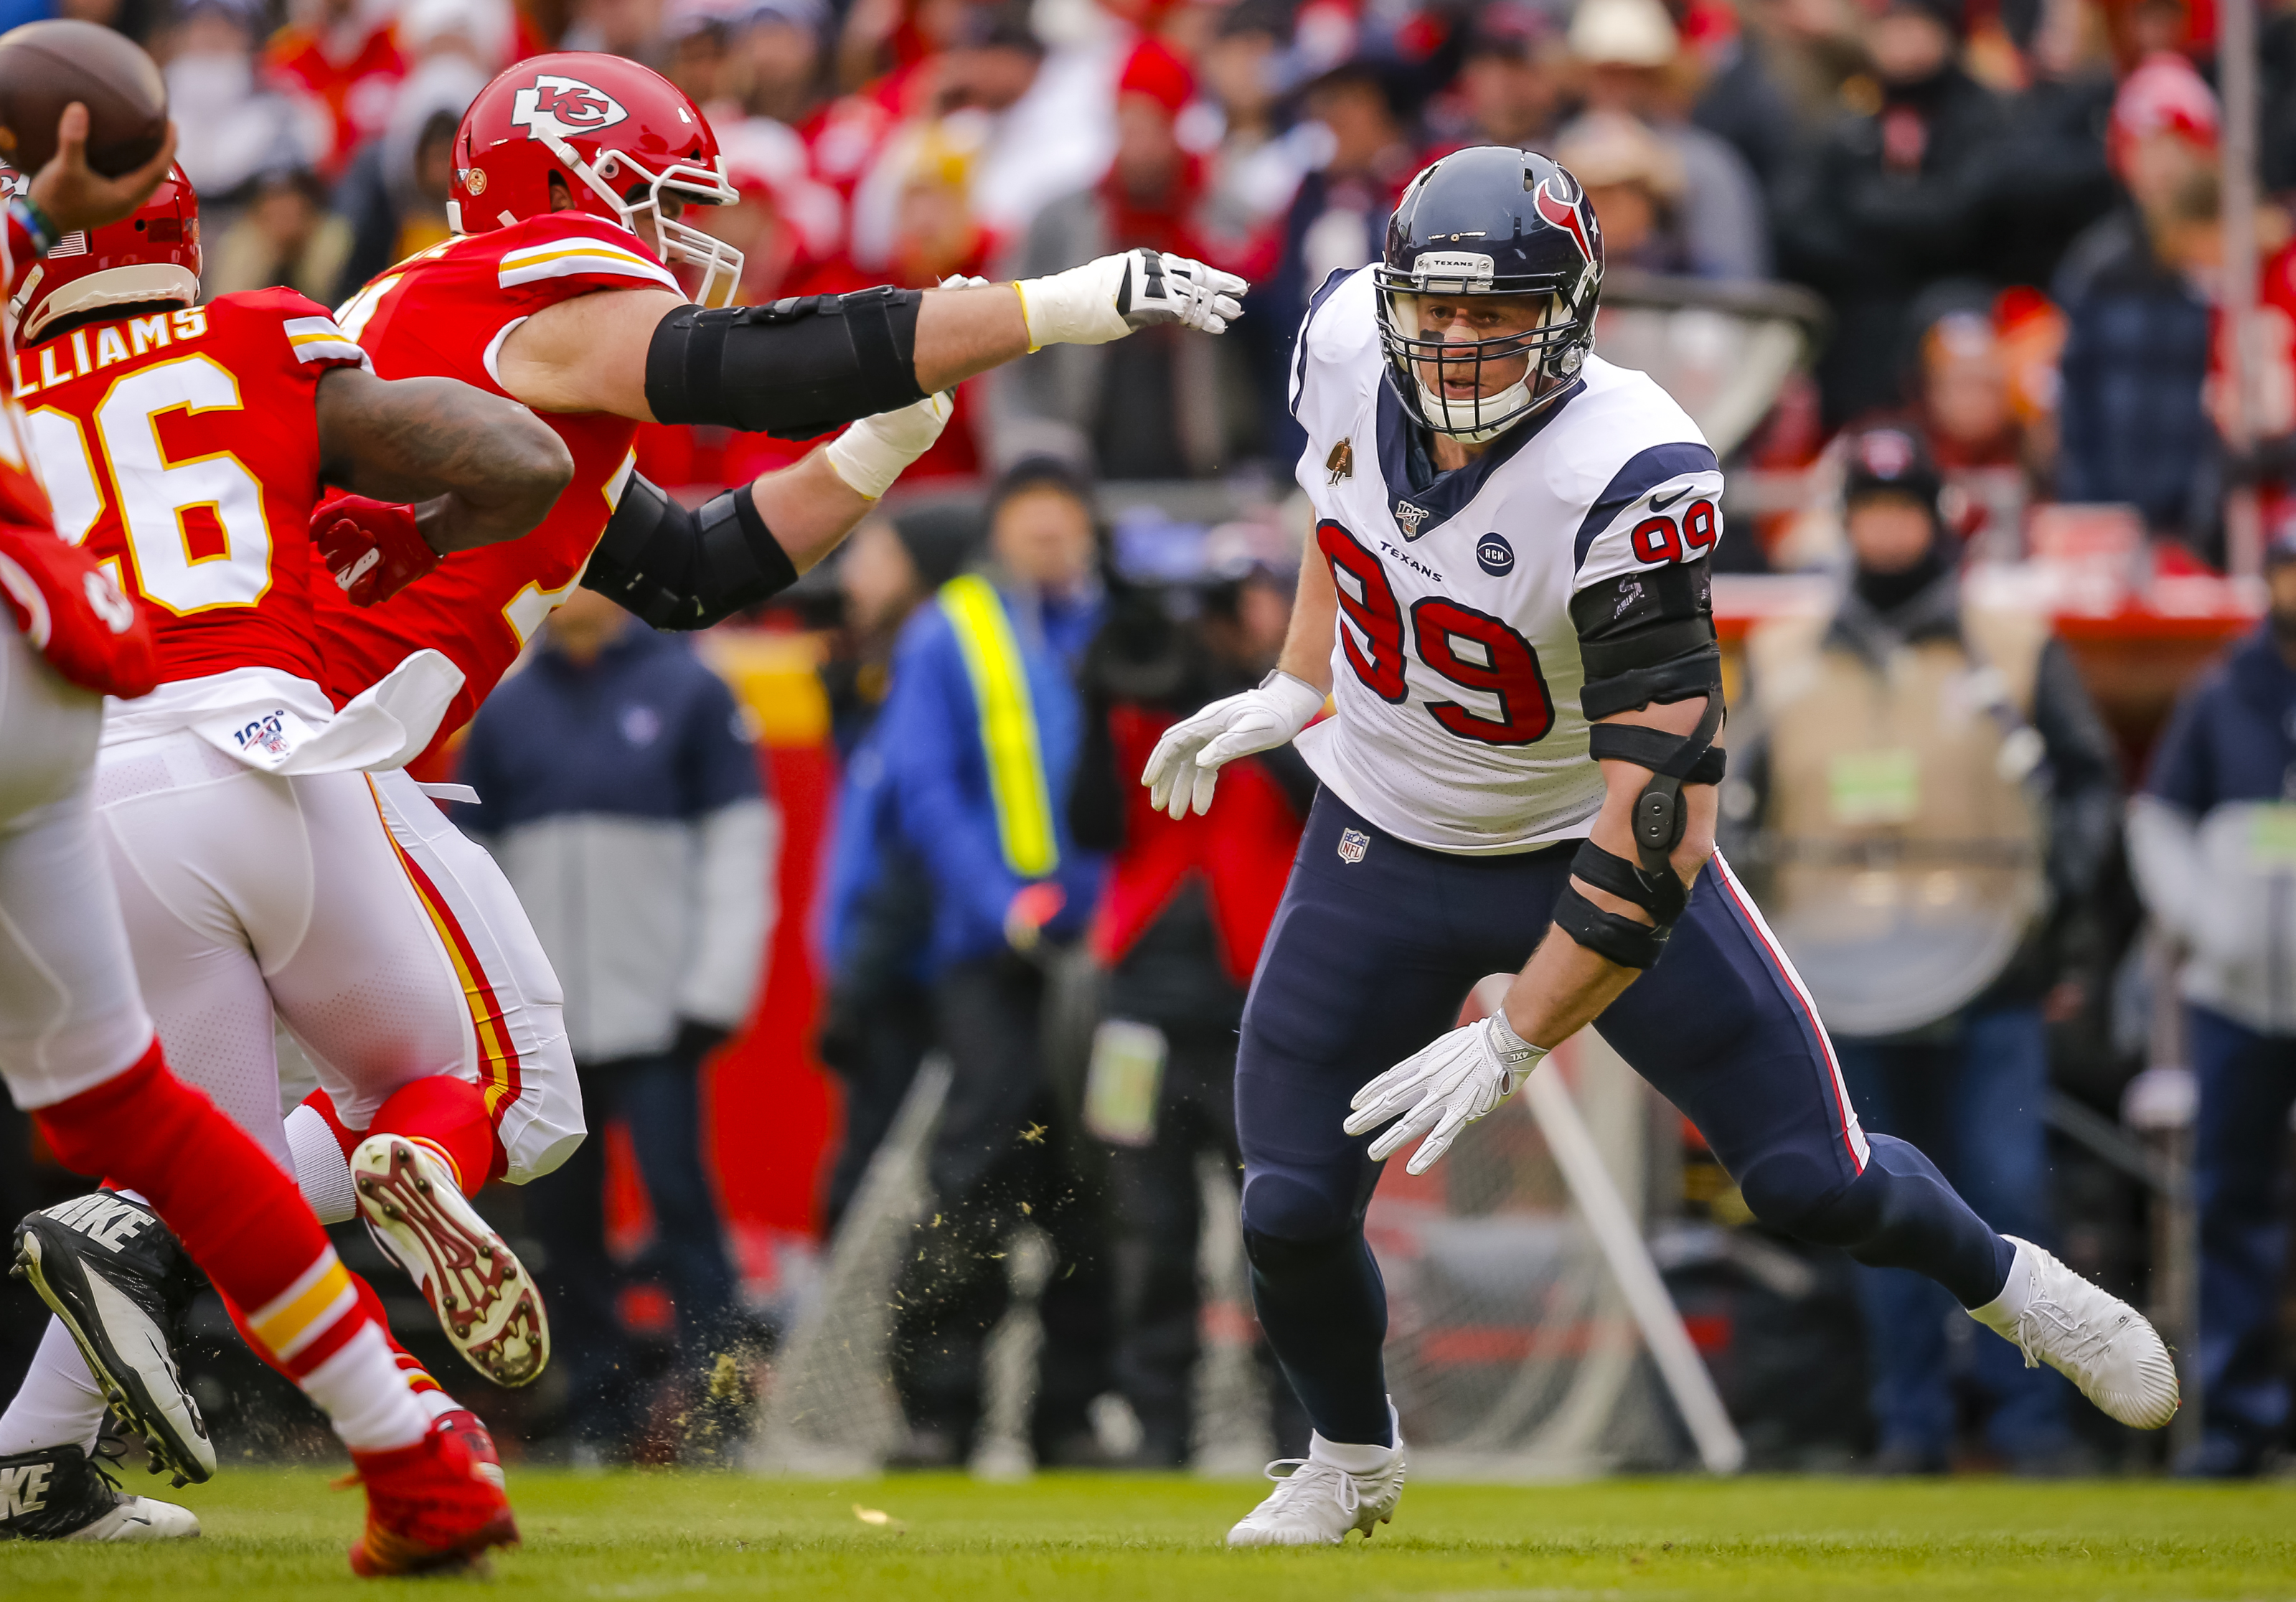 KC Chiefs: Trading for J.J. Watt would give defense a big boost in 2021